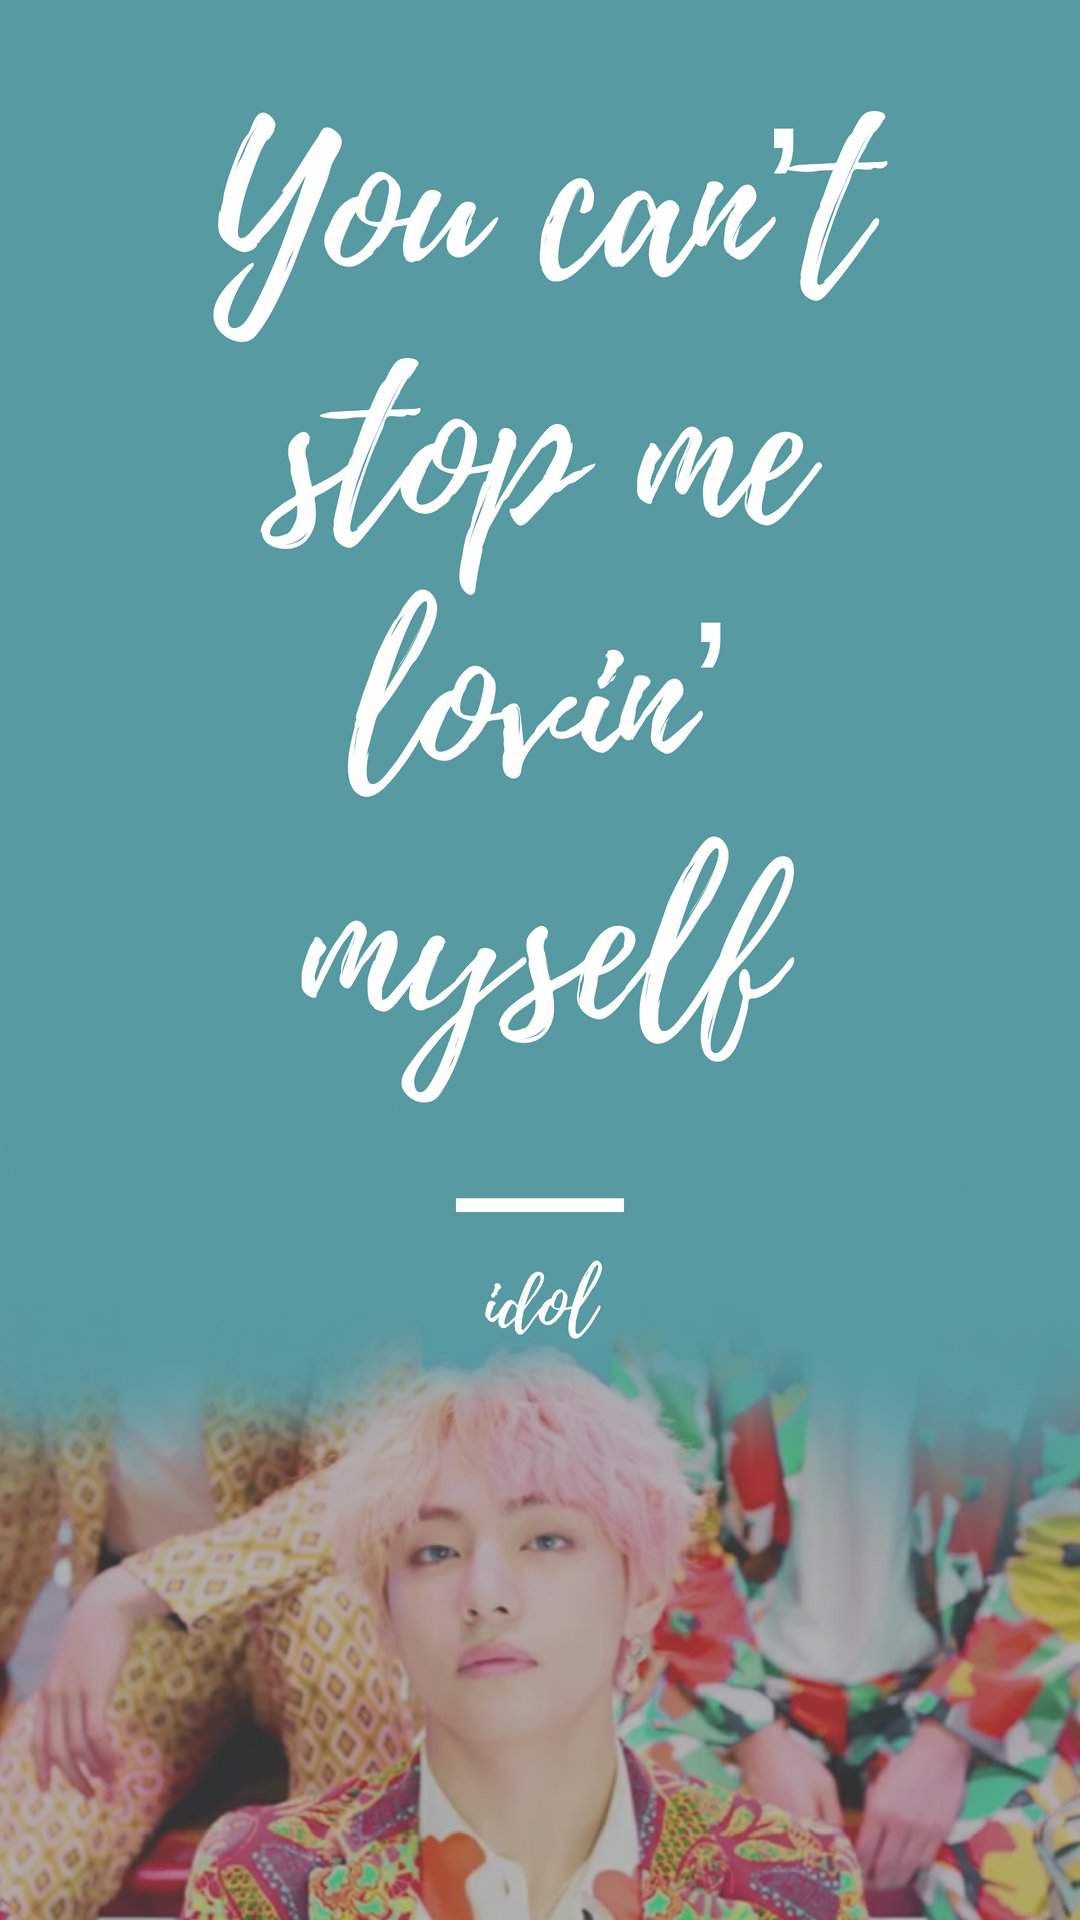 You Can T Stop Me Loving Myself - HD Wallpaper 